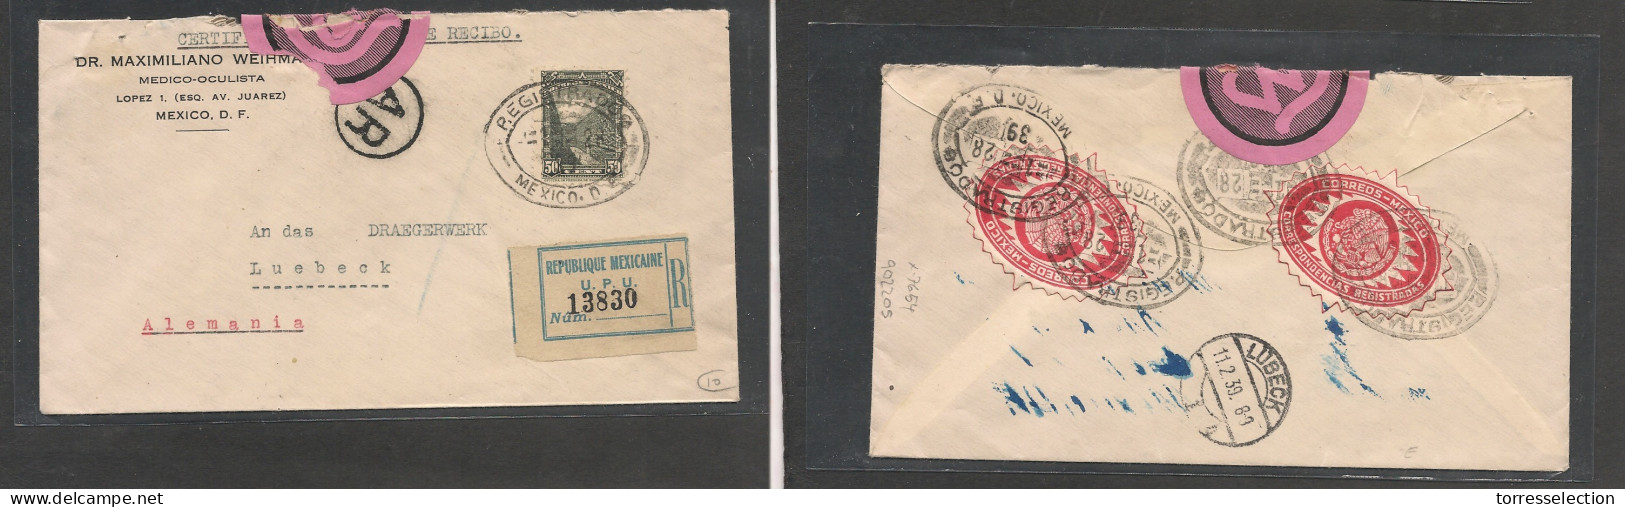 MEXICO. Mexico Cover - 1928 DF To Germany Lubeck Registered AR Single Fkd Env+ Resealed Label Transited Oftalmologist Bu - Mexiko